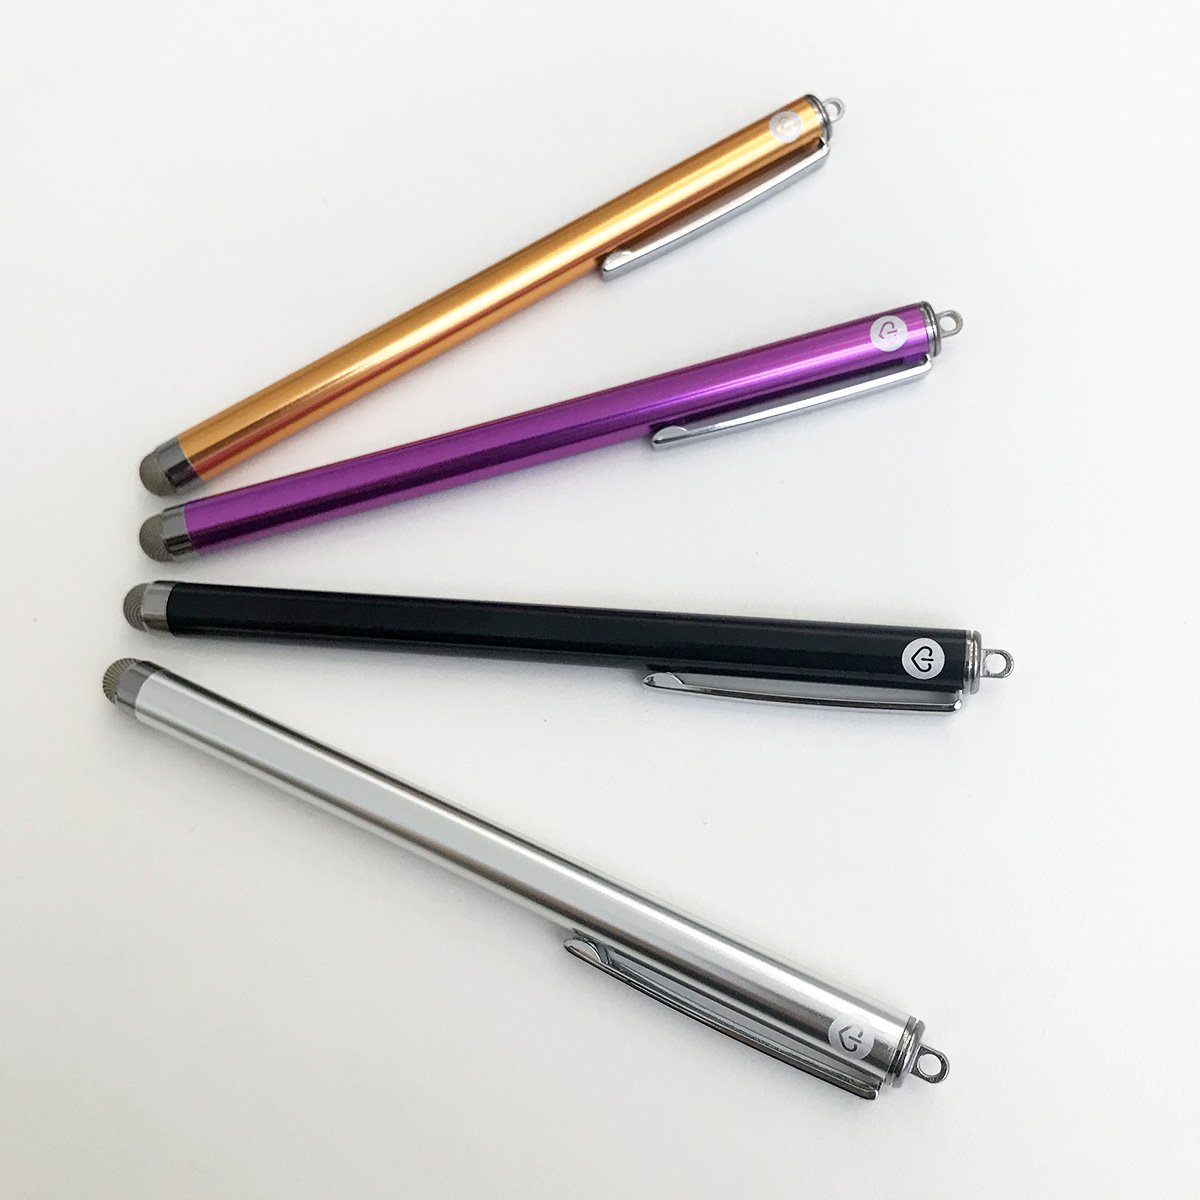 Our Best Stylus Pens For iPad and iPhone. $10 to $22 Less EMF Stylus Tech Wellness Click To Choose Stylus Type and Color 